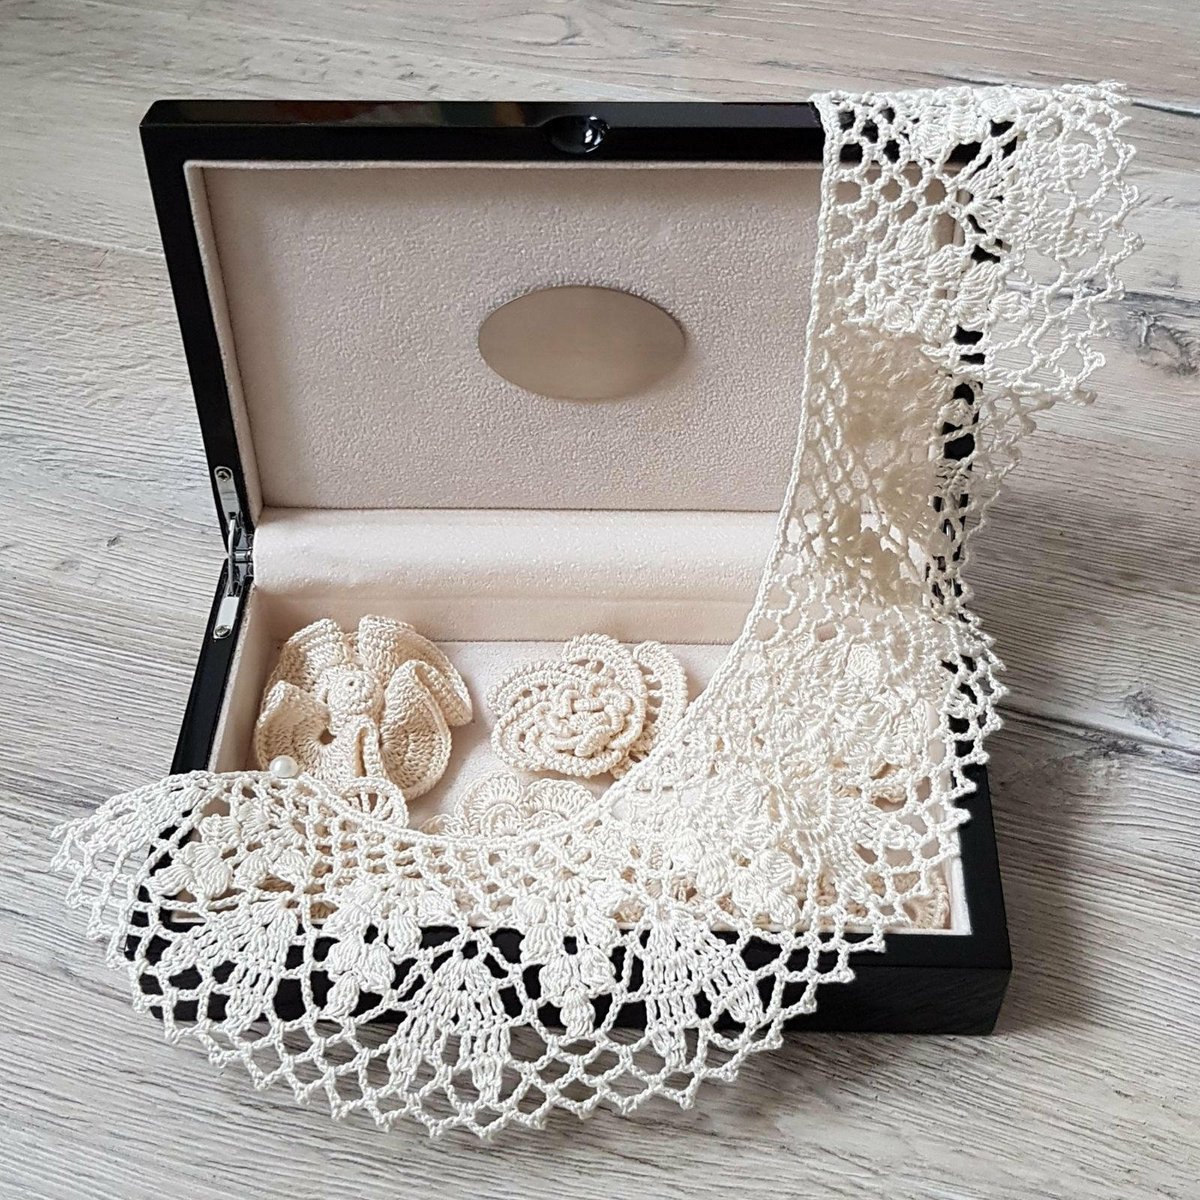 Excited to share the latest addition to my #etsy shop: Detachable Lace Crochet Collar Necklace | Handmade Victorian Crochet Collar | Peter Pan Collar | Women's Fashion and Accessories #rbgcostumecollar #bertrhalacecollar #newvictorianstyle #peterpancollar etsy.me/2O9EKL3